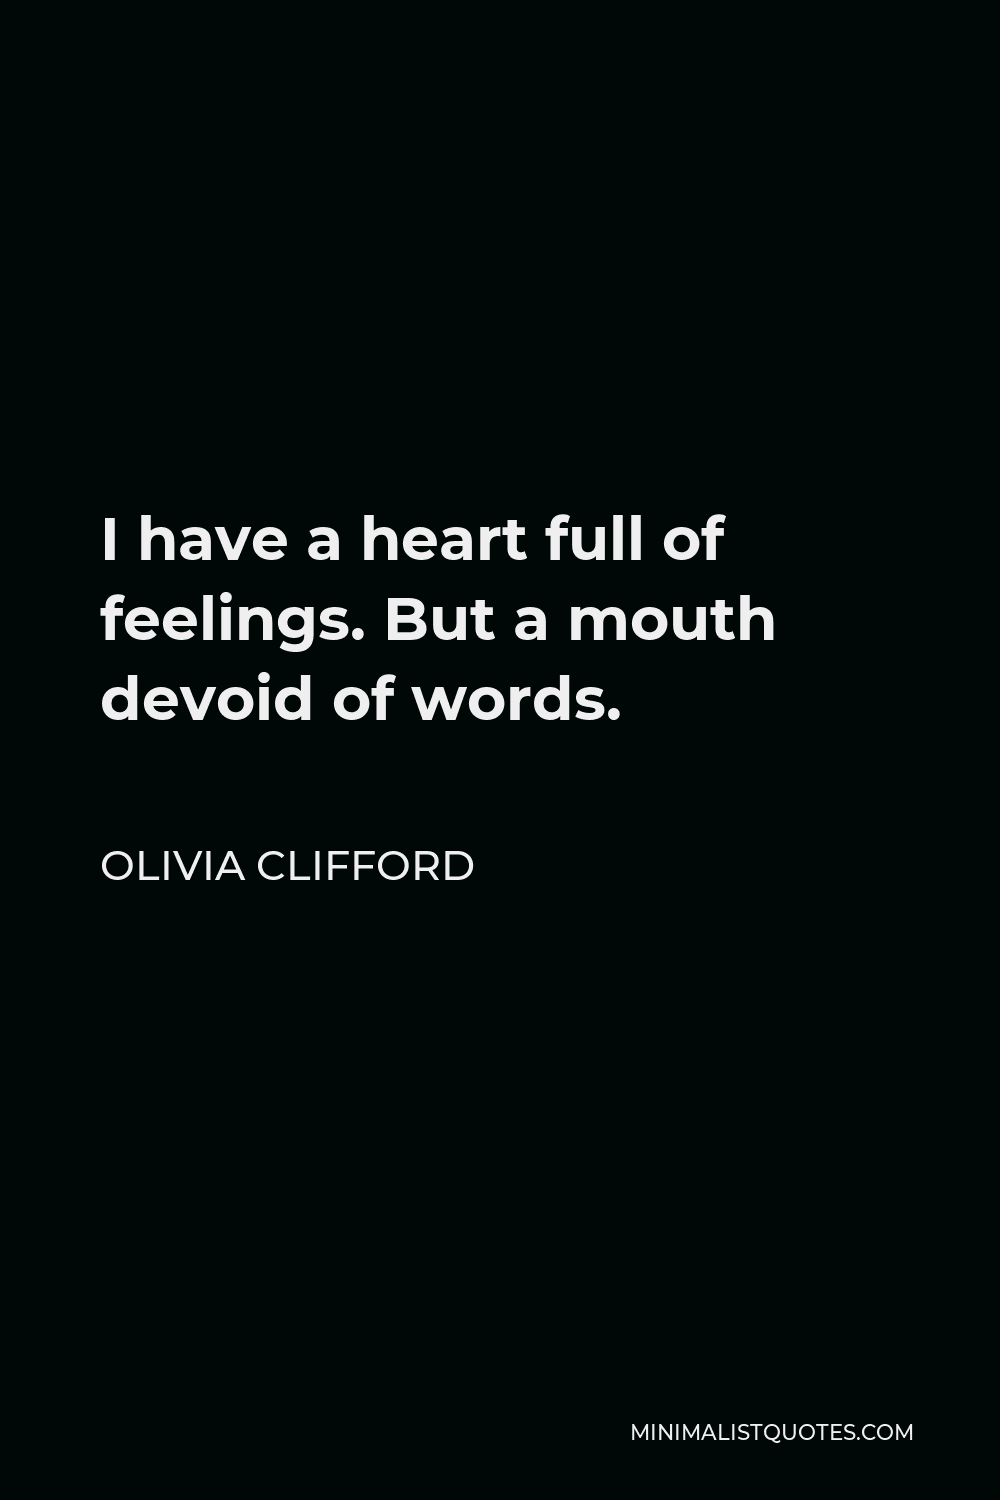 Olivia Clifford Quote I Have A Heart Full Of Feelings But A Mouth Devoid Of Words 